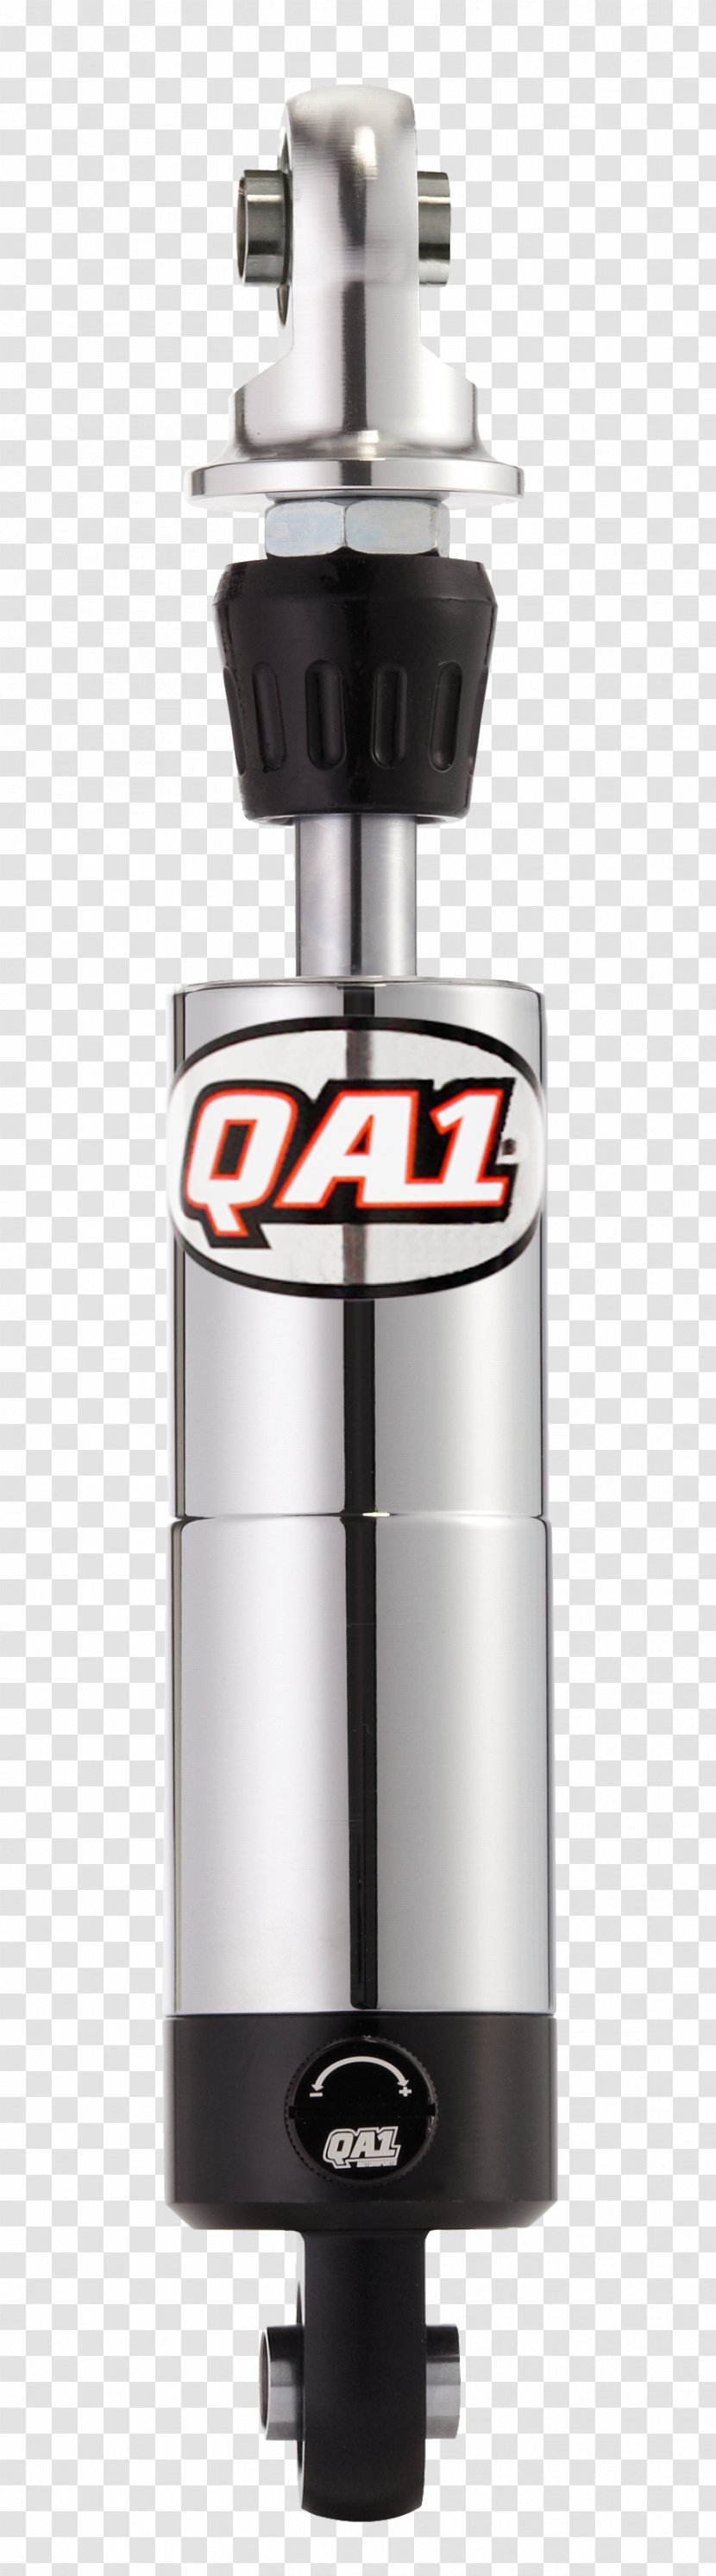 Product Design Tool QA1 Precision Products Inc Shock Absorber - Absorbers Transparent PNG